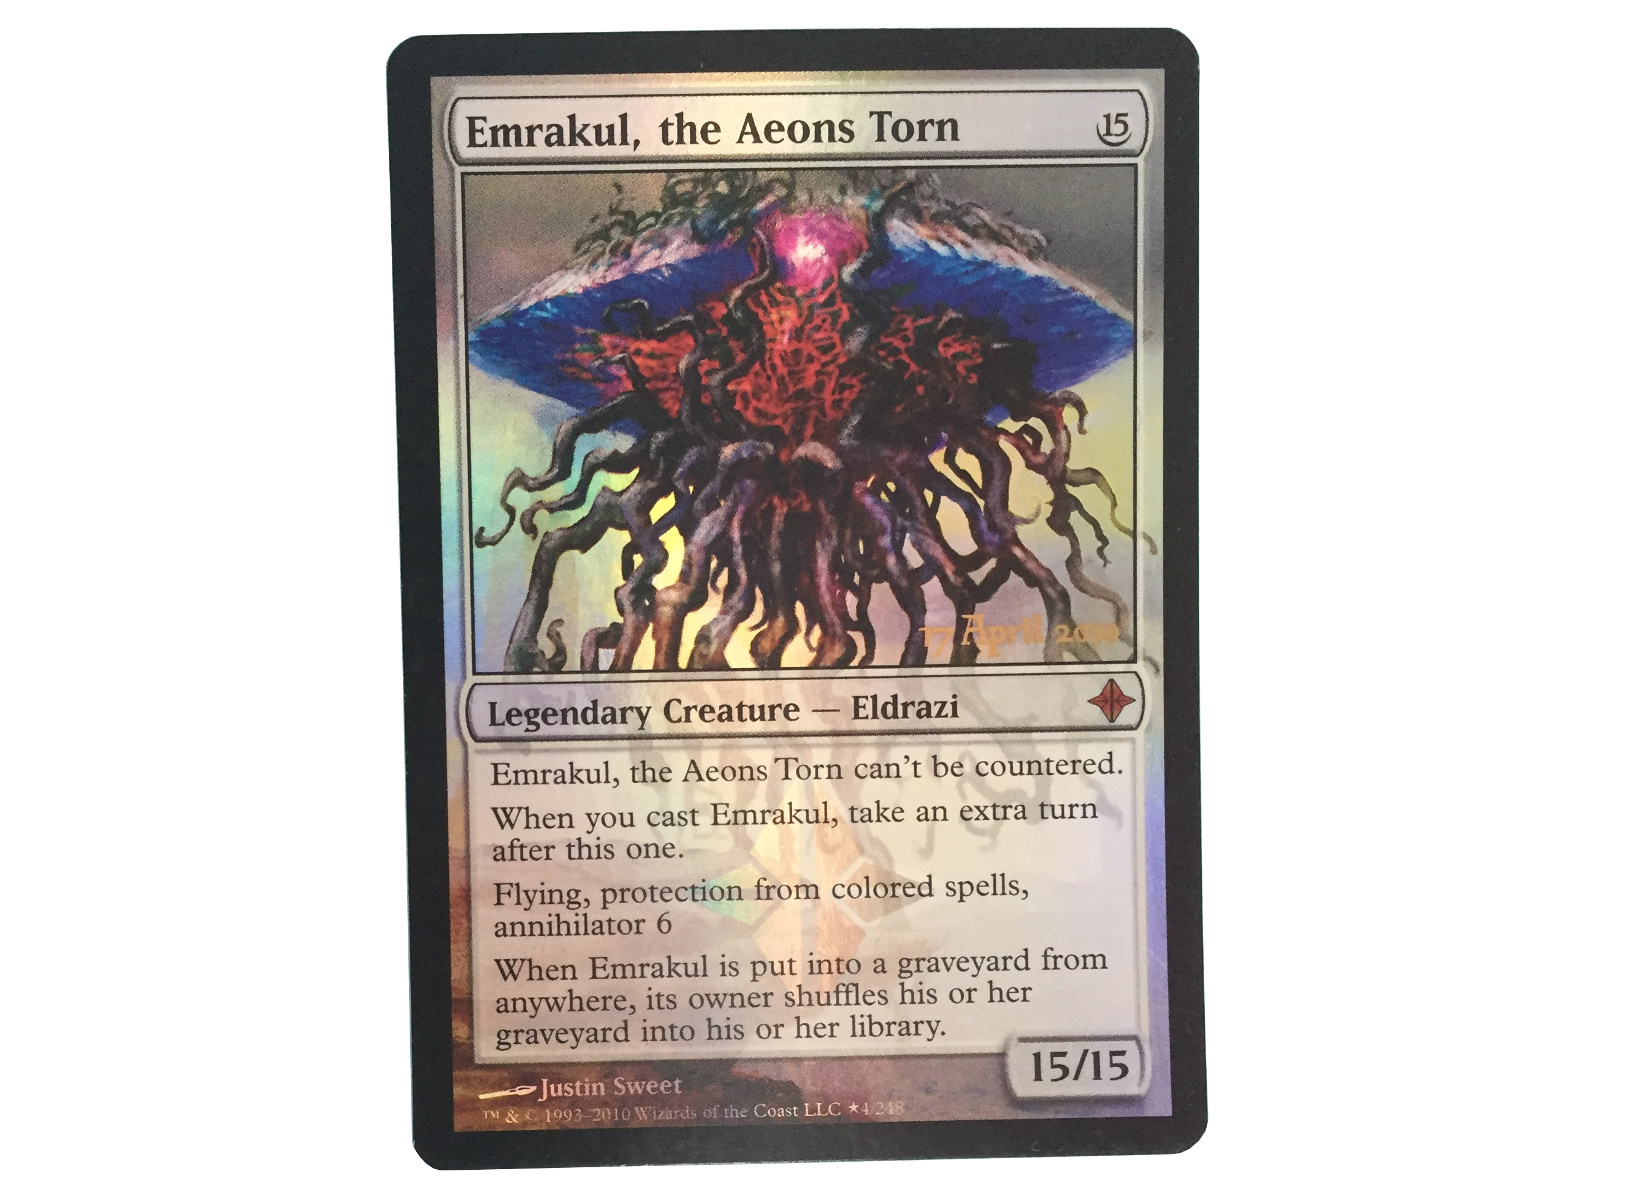 Emrakul, the Aeons Torn is an artifact from Daniel’s first-year affair with...